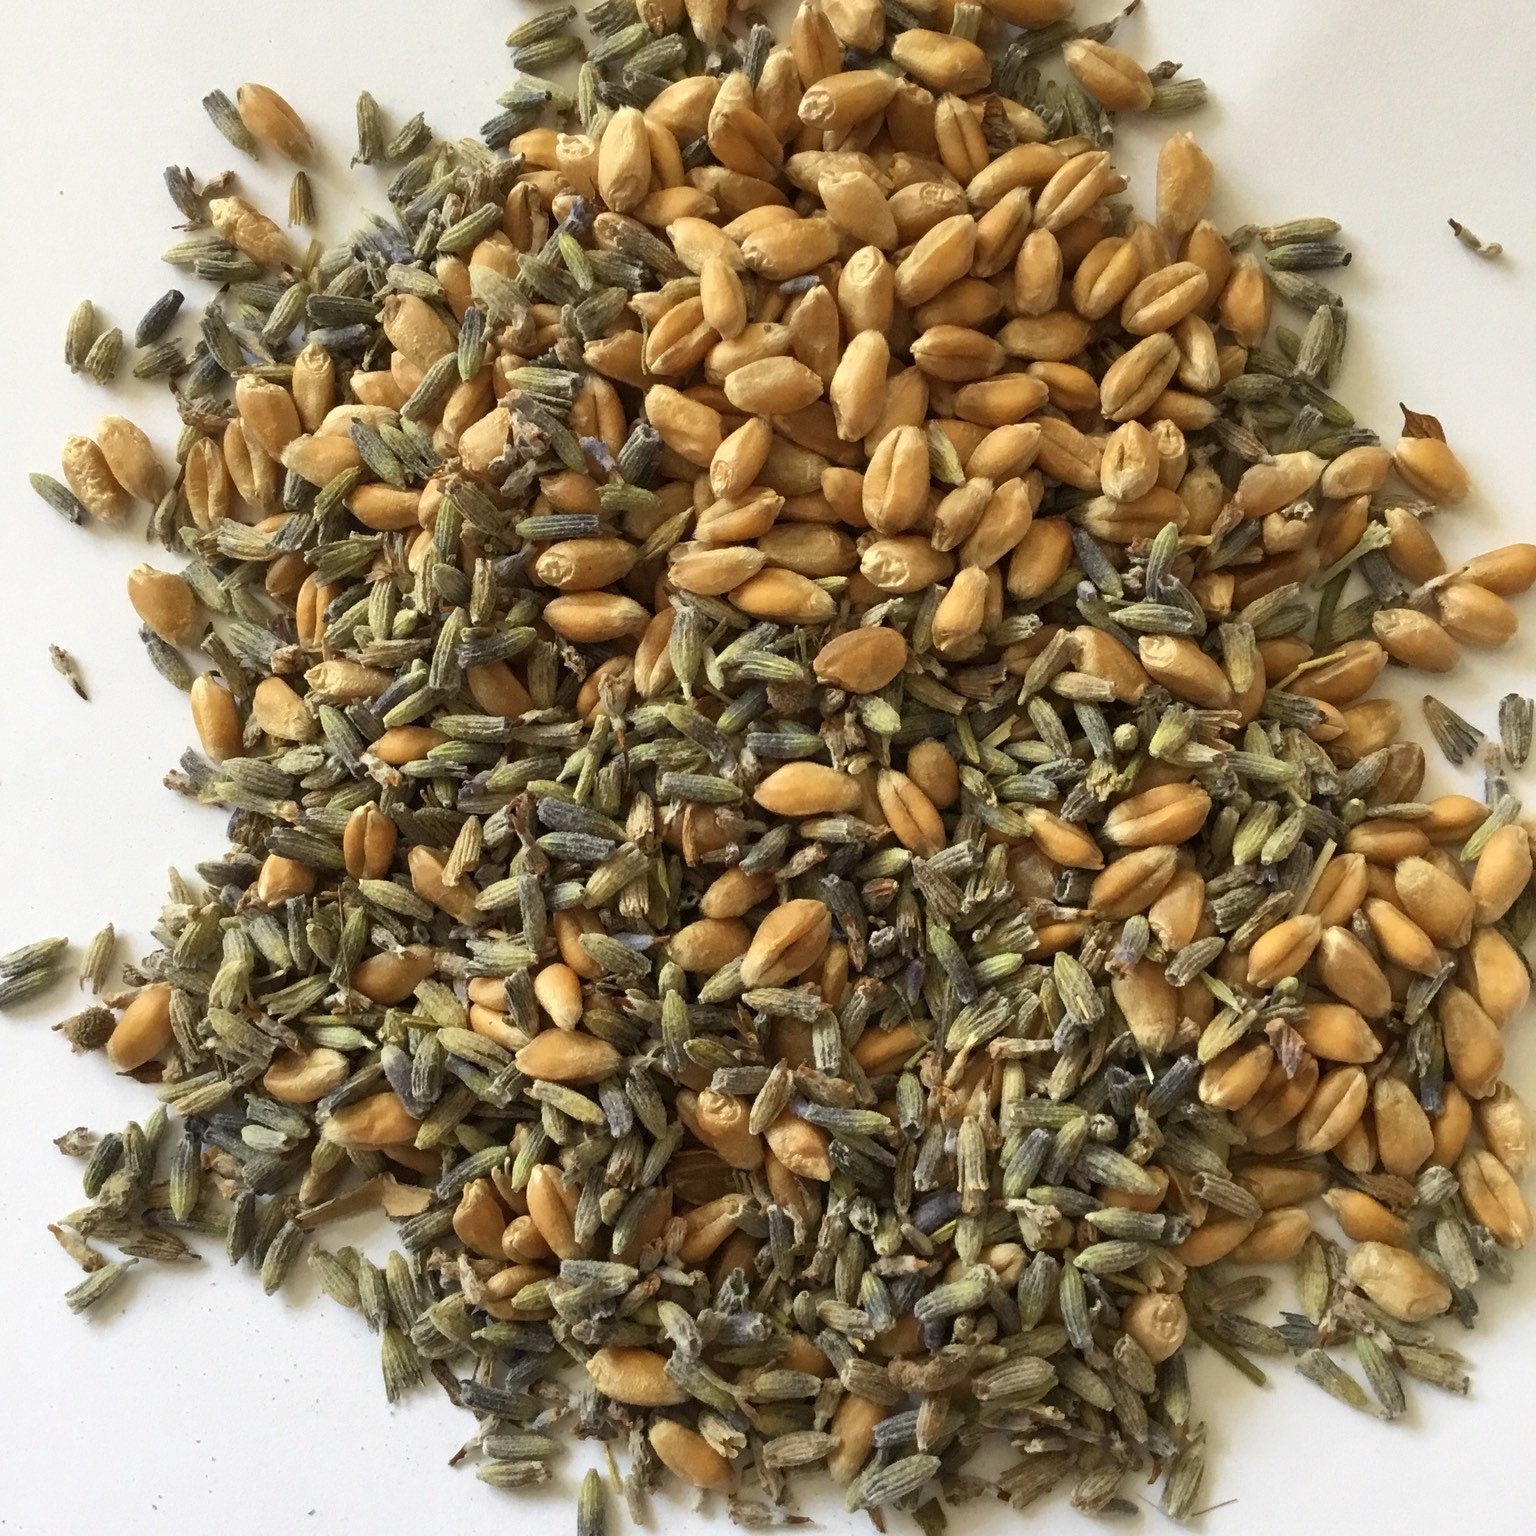 whole somerset wheat and lavender flower filler for wheat bags from wheatbagheaven.com